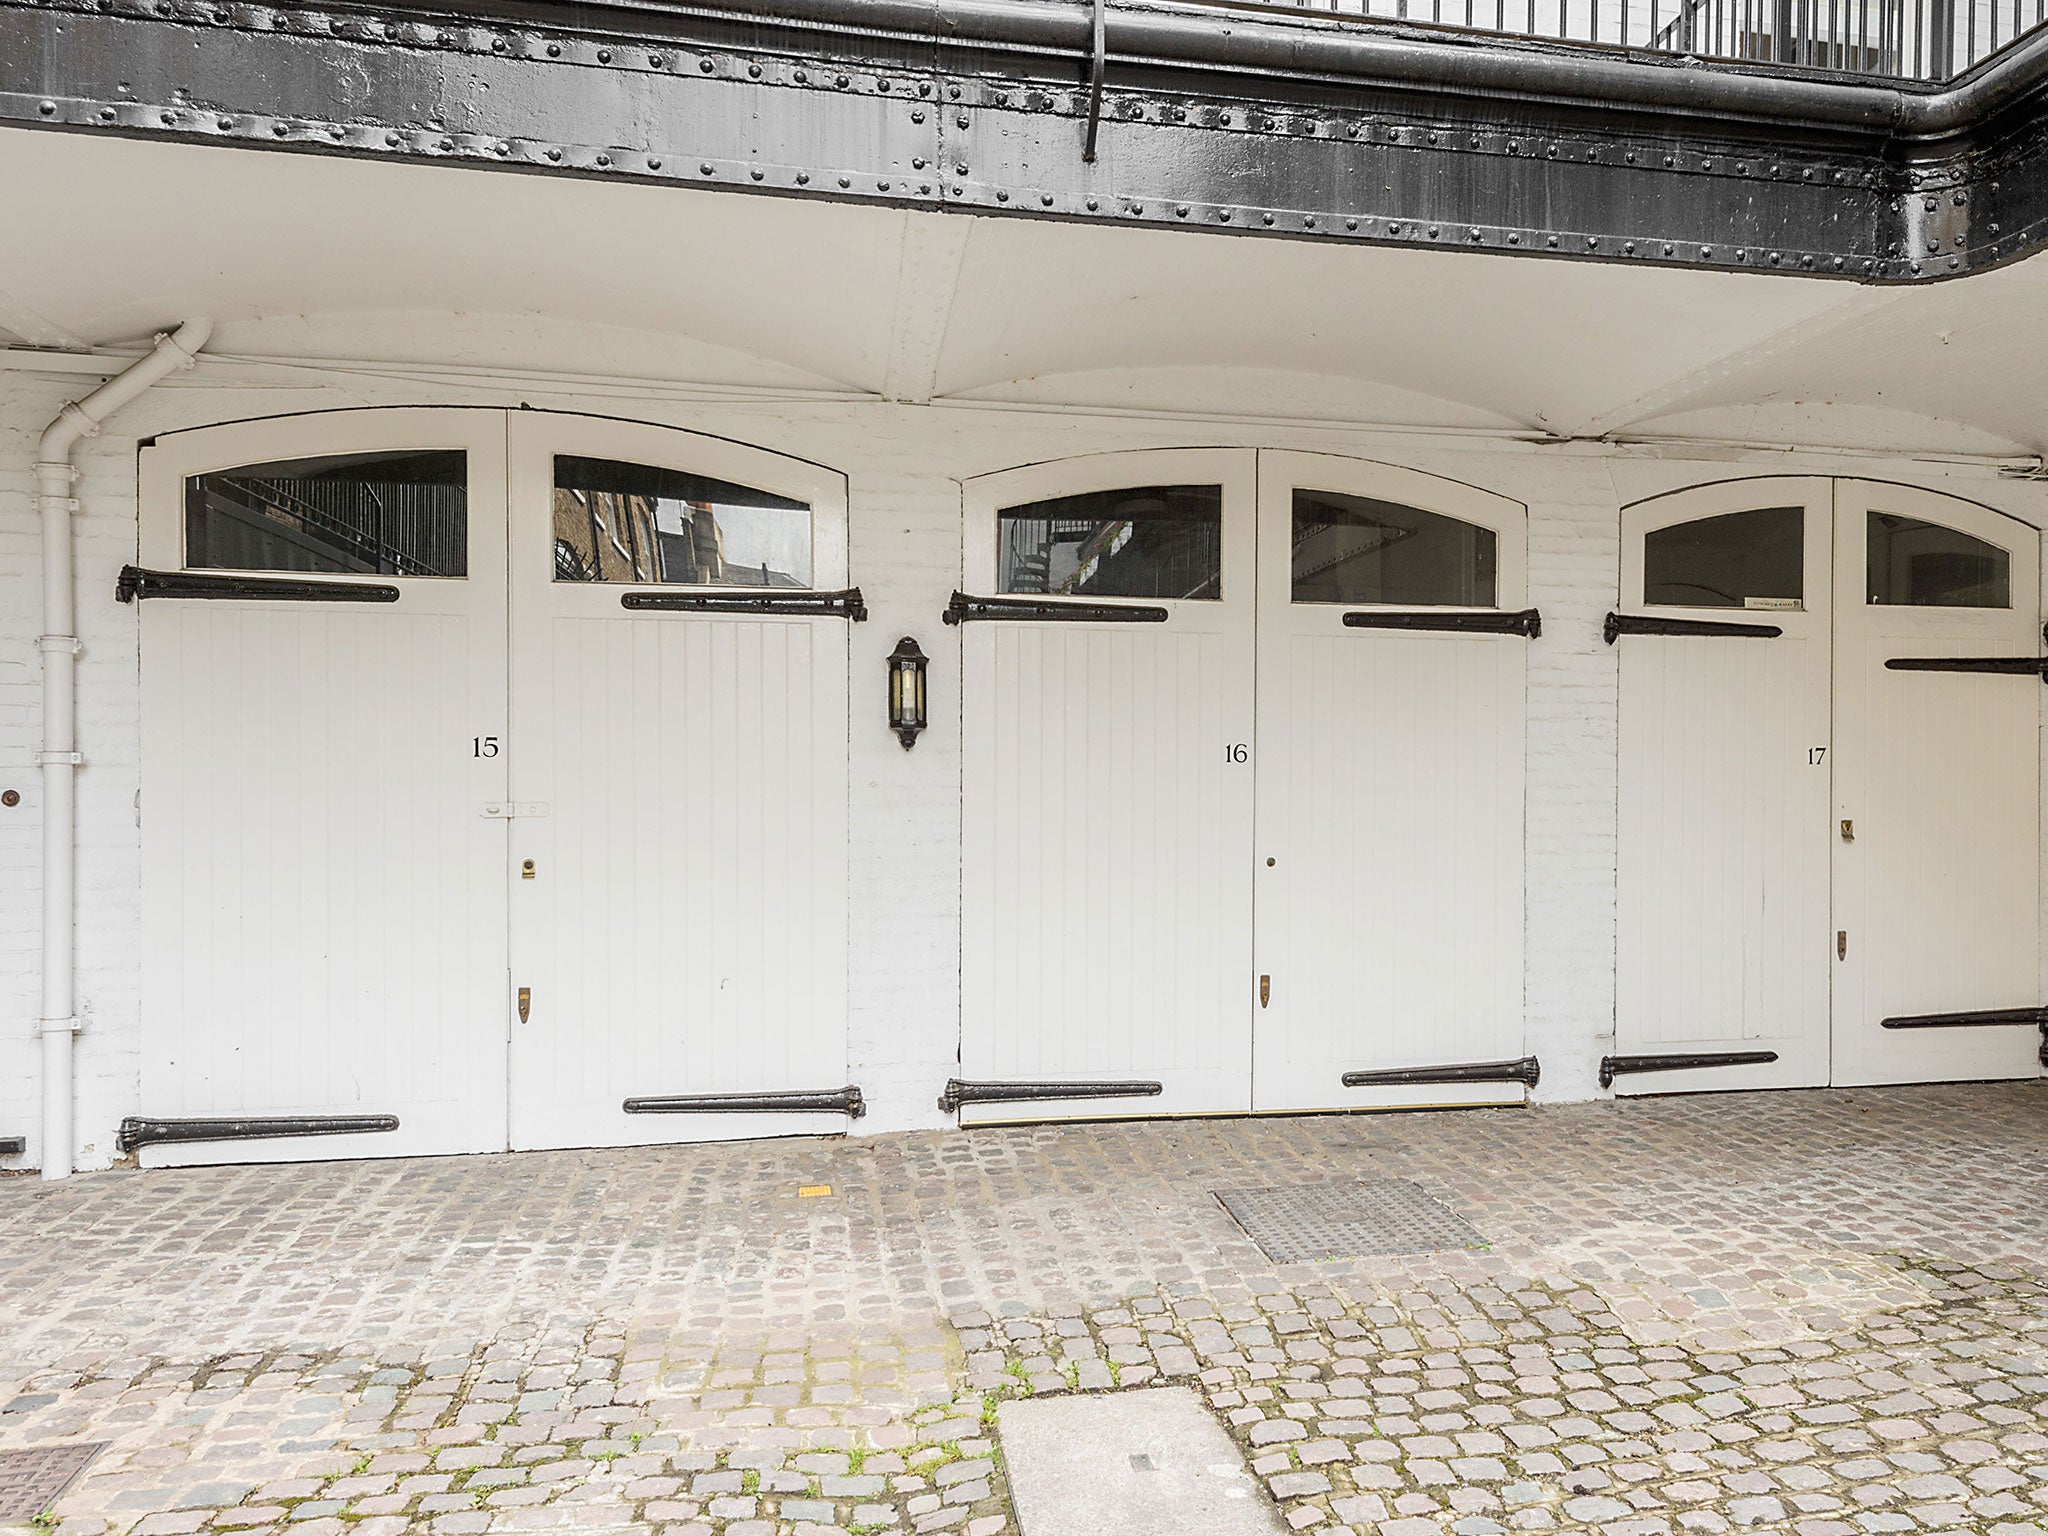 The garage was up for sale in Canning Place Mews for £500,000